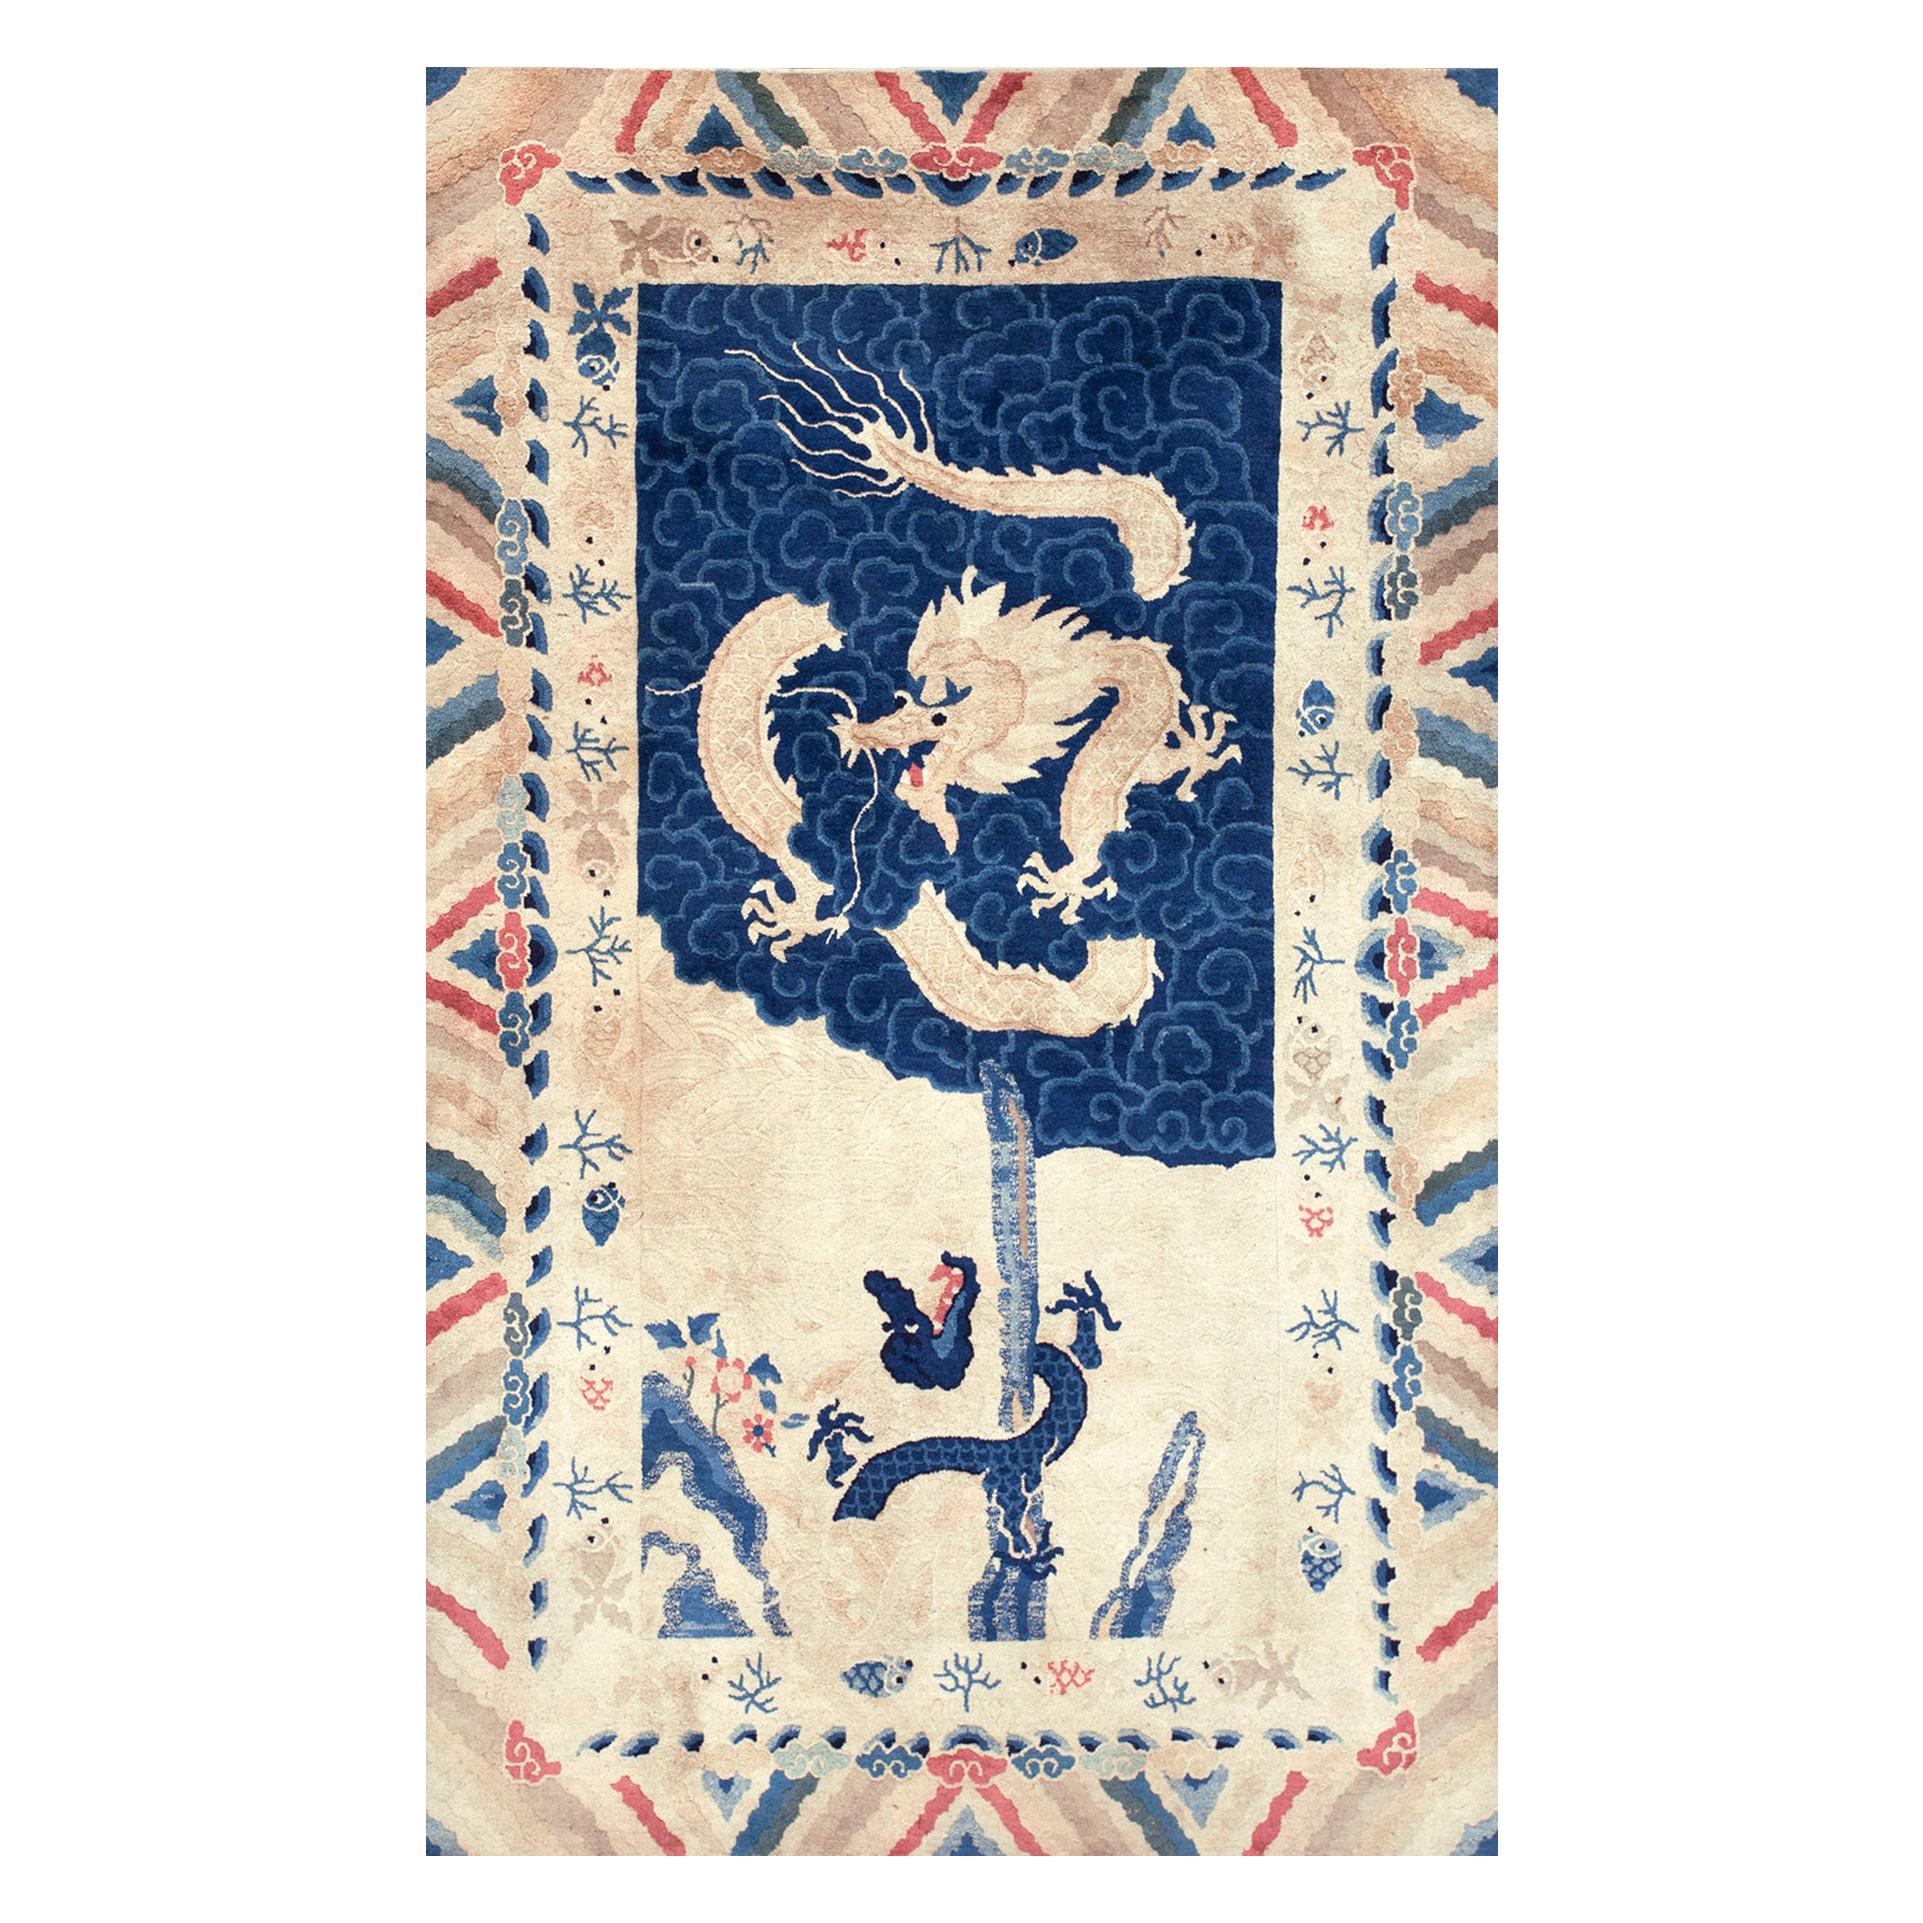 Early 20th Century Chinese Peking Dragon Carpet ( 4'2" x 6'10" - 127 x 208 ) For Sale